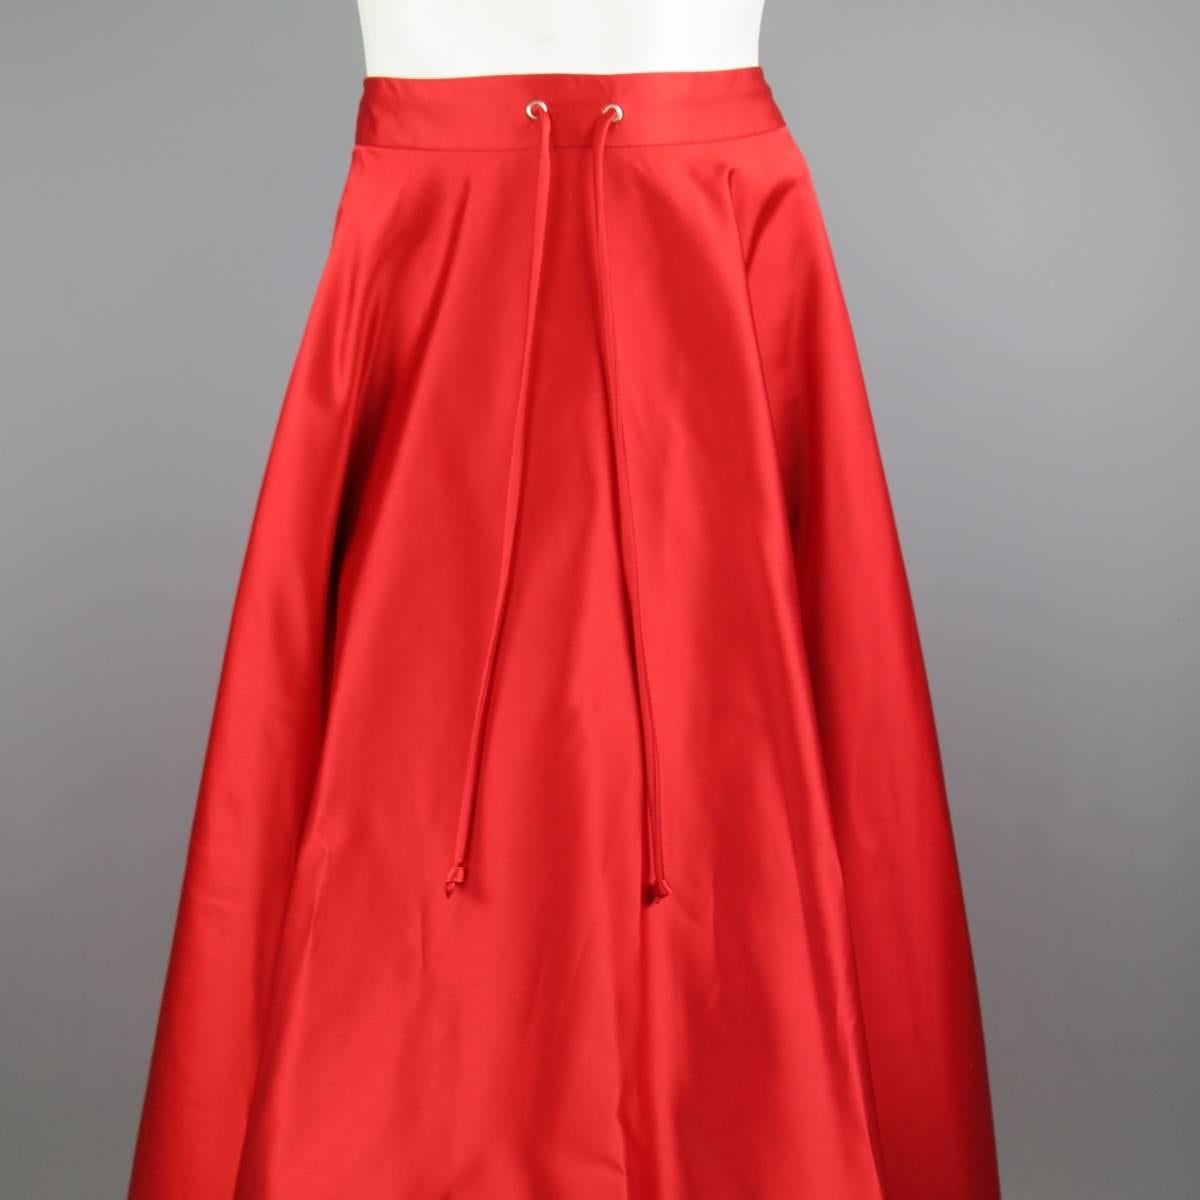 RALPH LAUREN COLLECTION red silk satin evening skirt features a drawstring tie in the front, zipper with hook and eye closure in the back. Minor imperfections. As-Is. Made in USA. Retails at $2999.00.
 
Good Pre-Owned Condition.
Marked: 8
